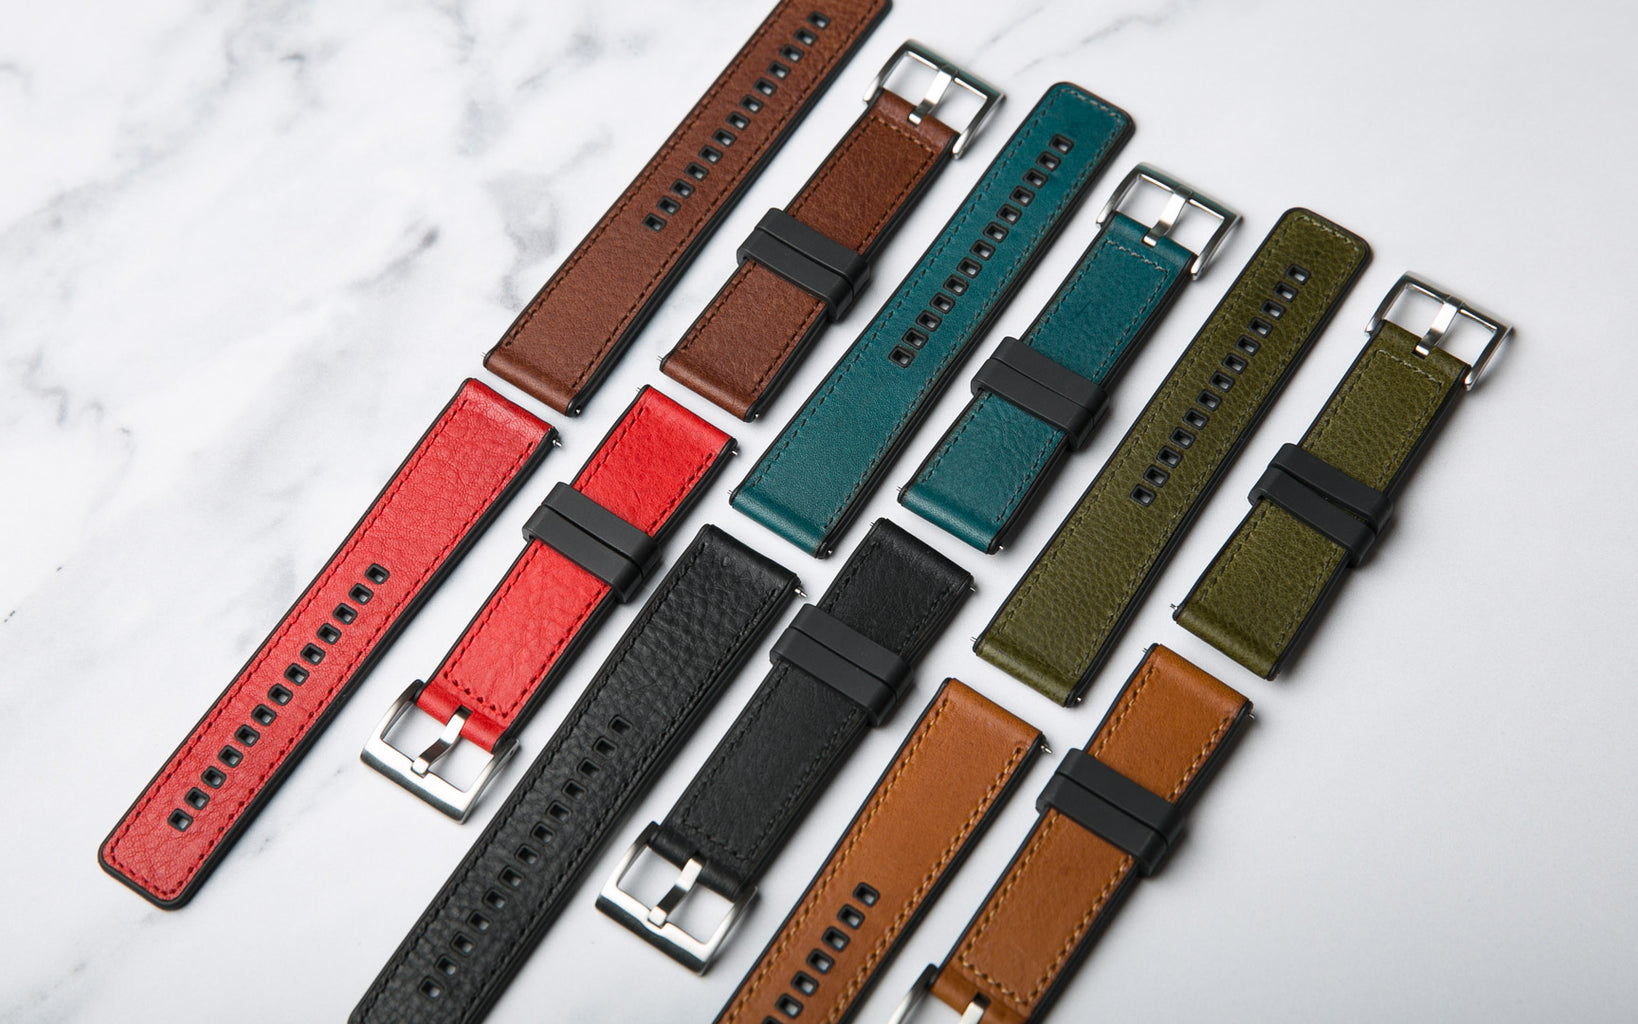 Winchester rubber and leather hybrid watch straps by North Straps